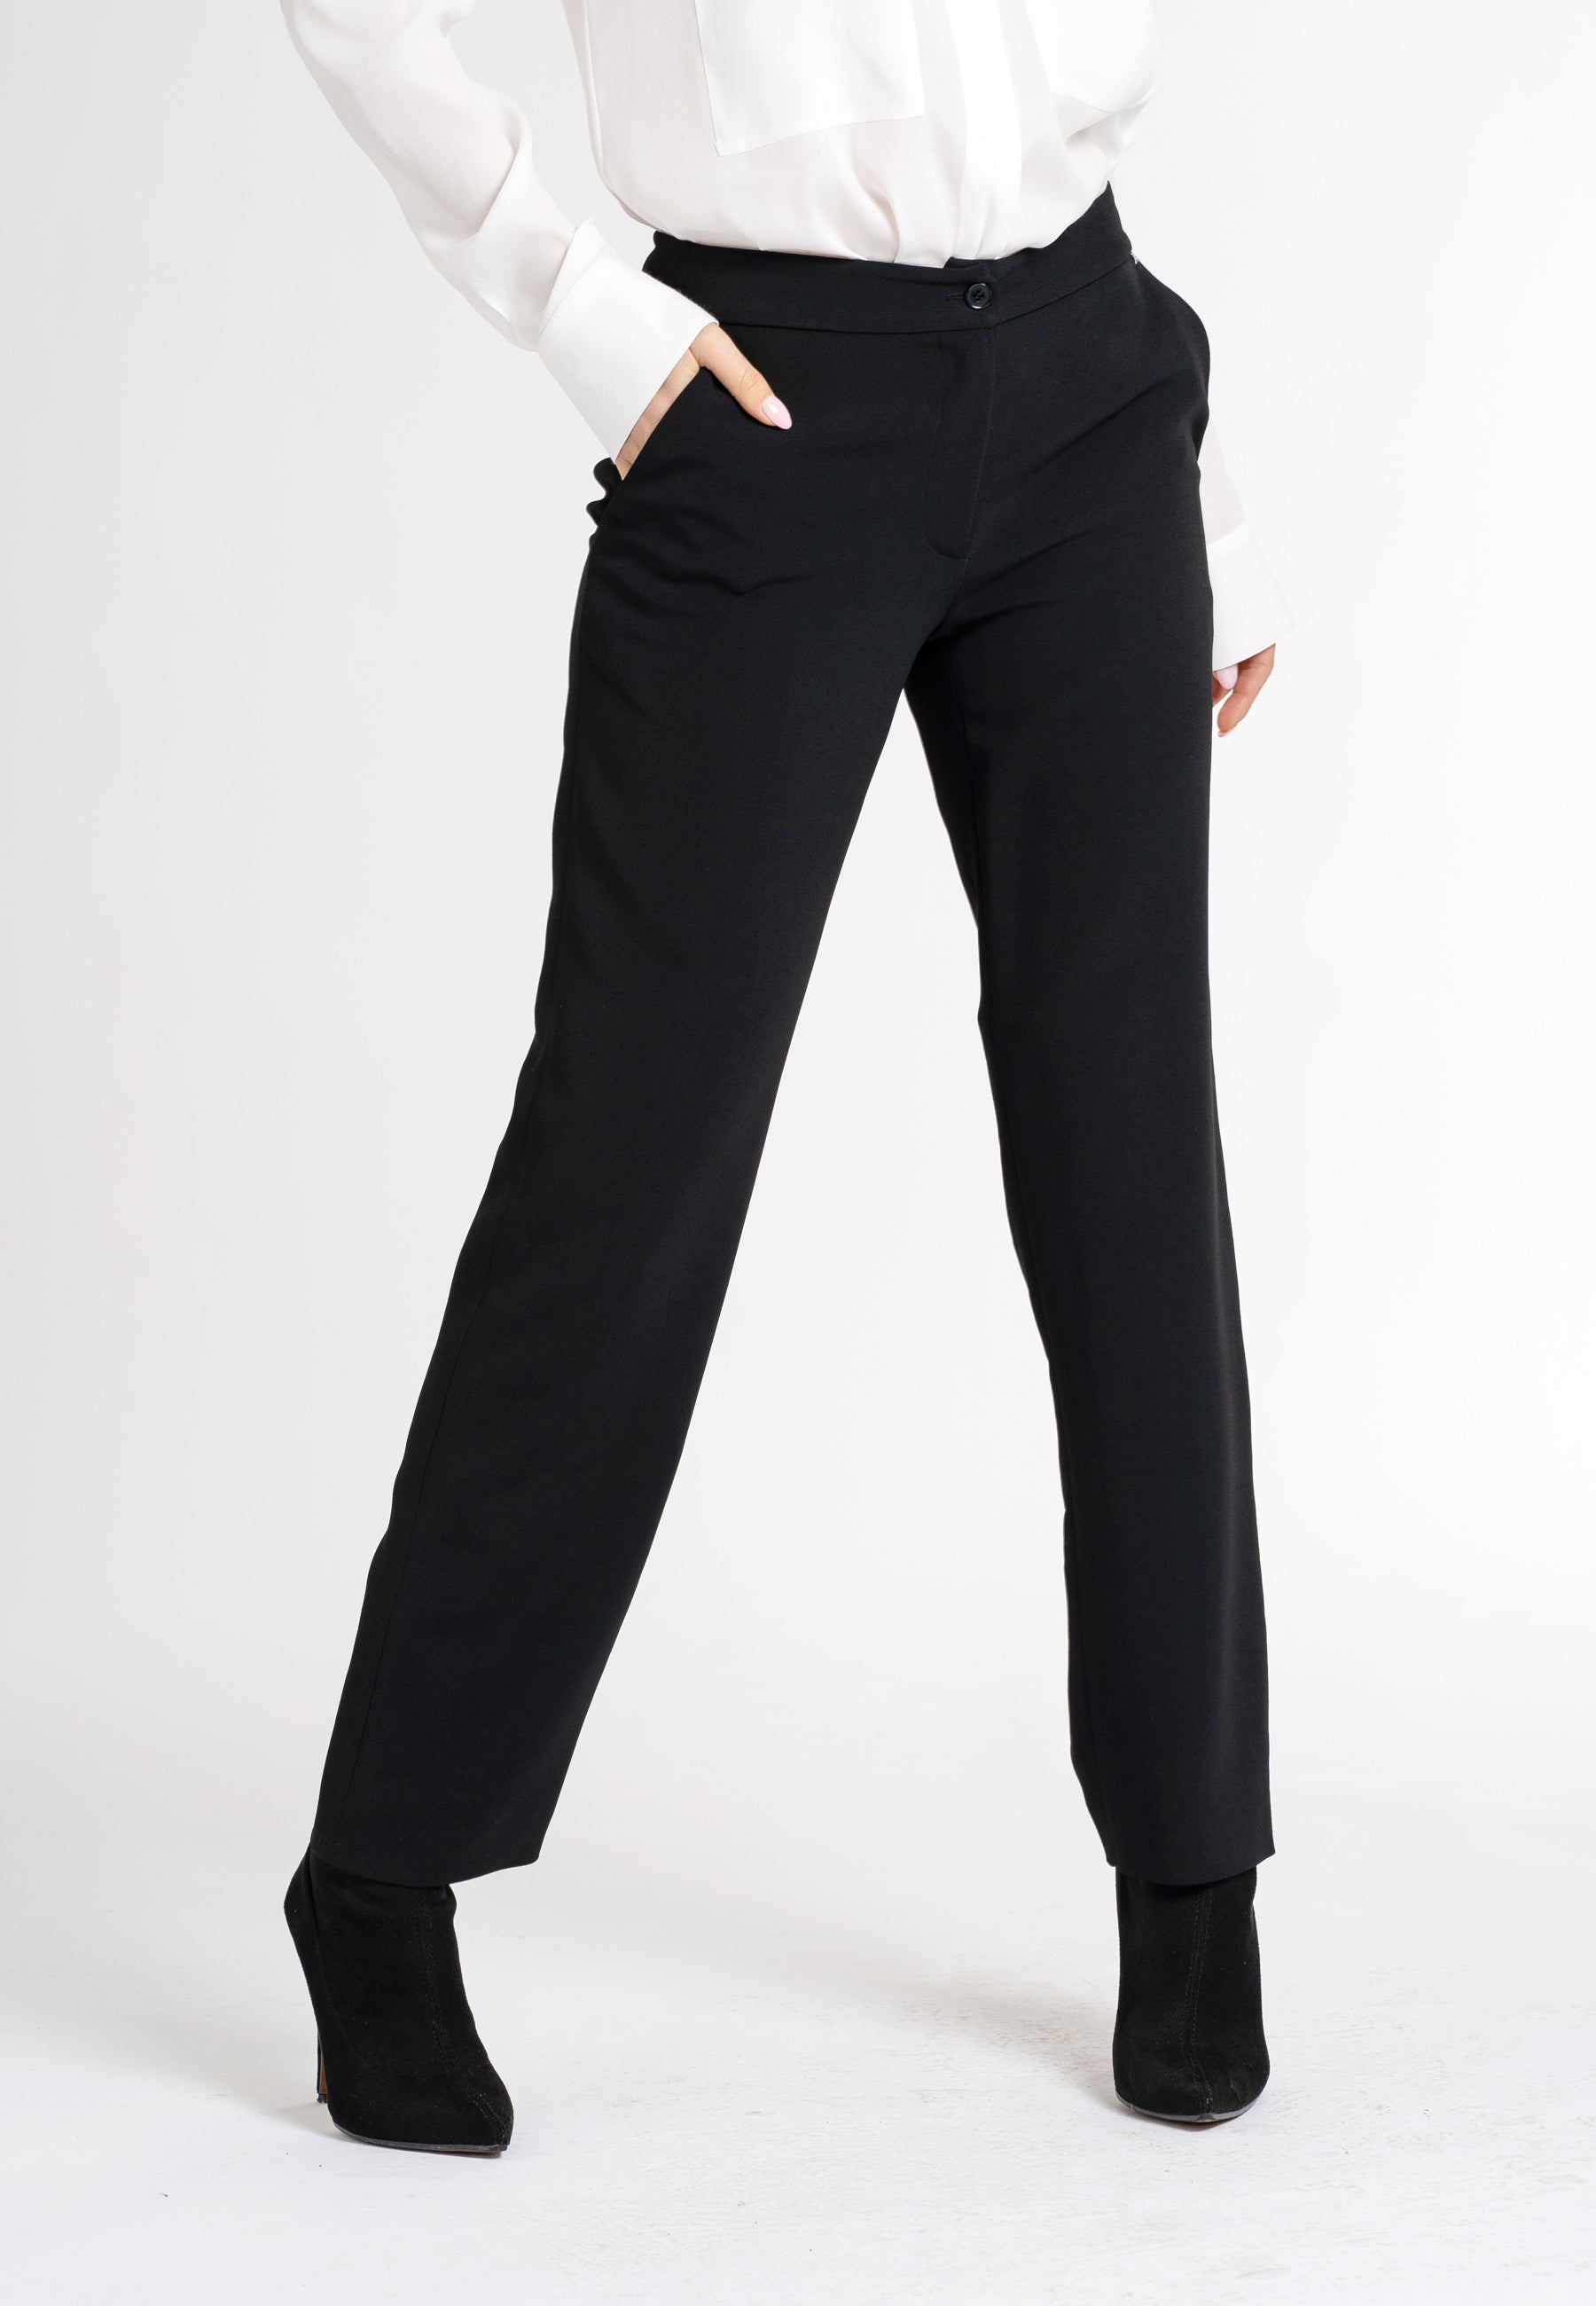 black pants ankle length pants women's ankle length pants ladies work pants with pockets australia black pants  women black pants black trousers for women black trousers designer pants black pants with pockets  black office pants for ladies designer pants for women